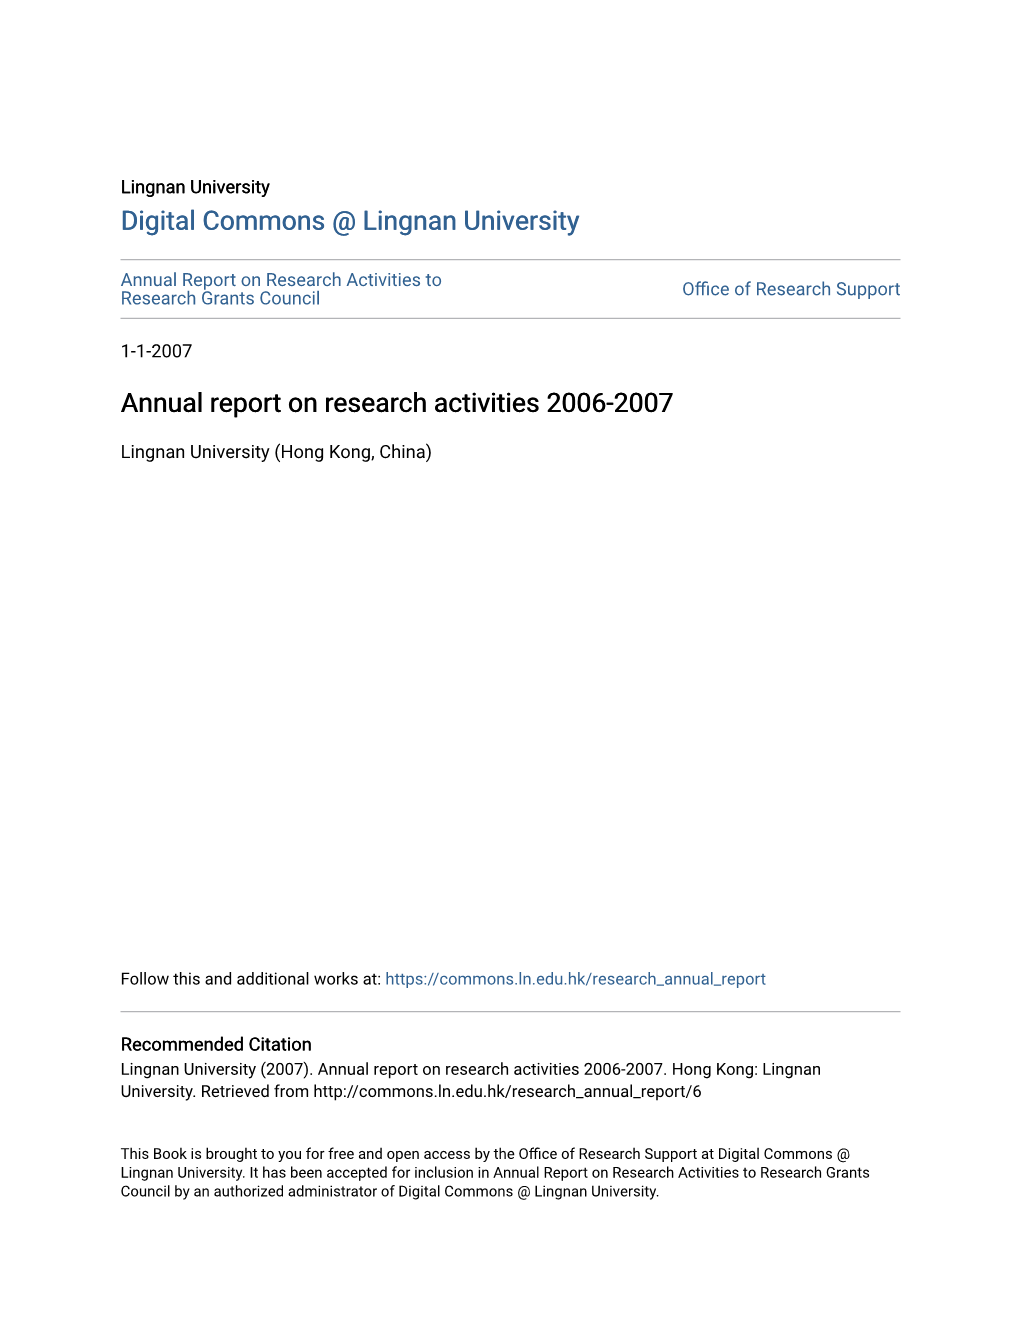 Annual Report on Research Activities 2006-2007